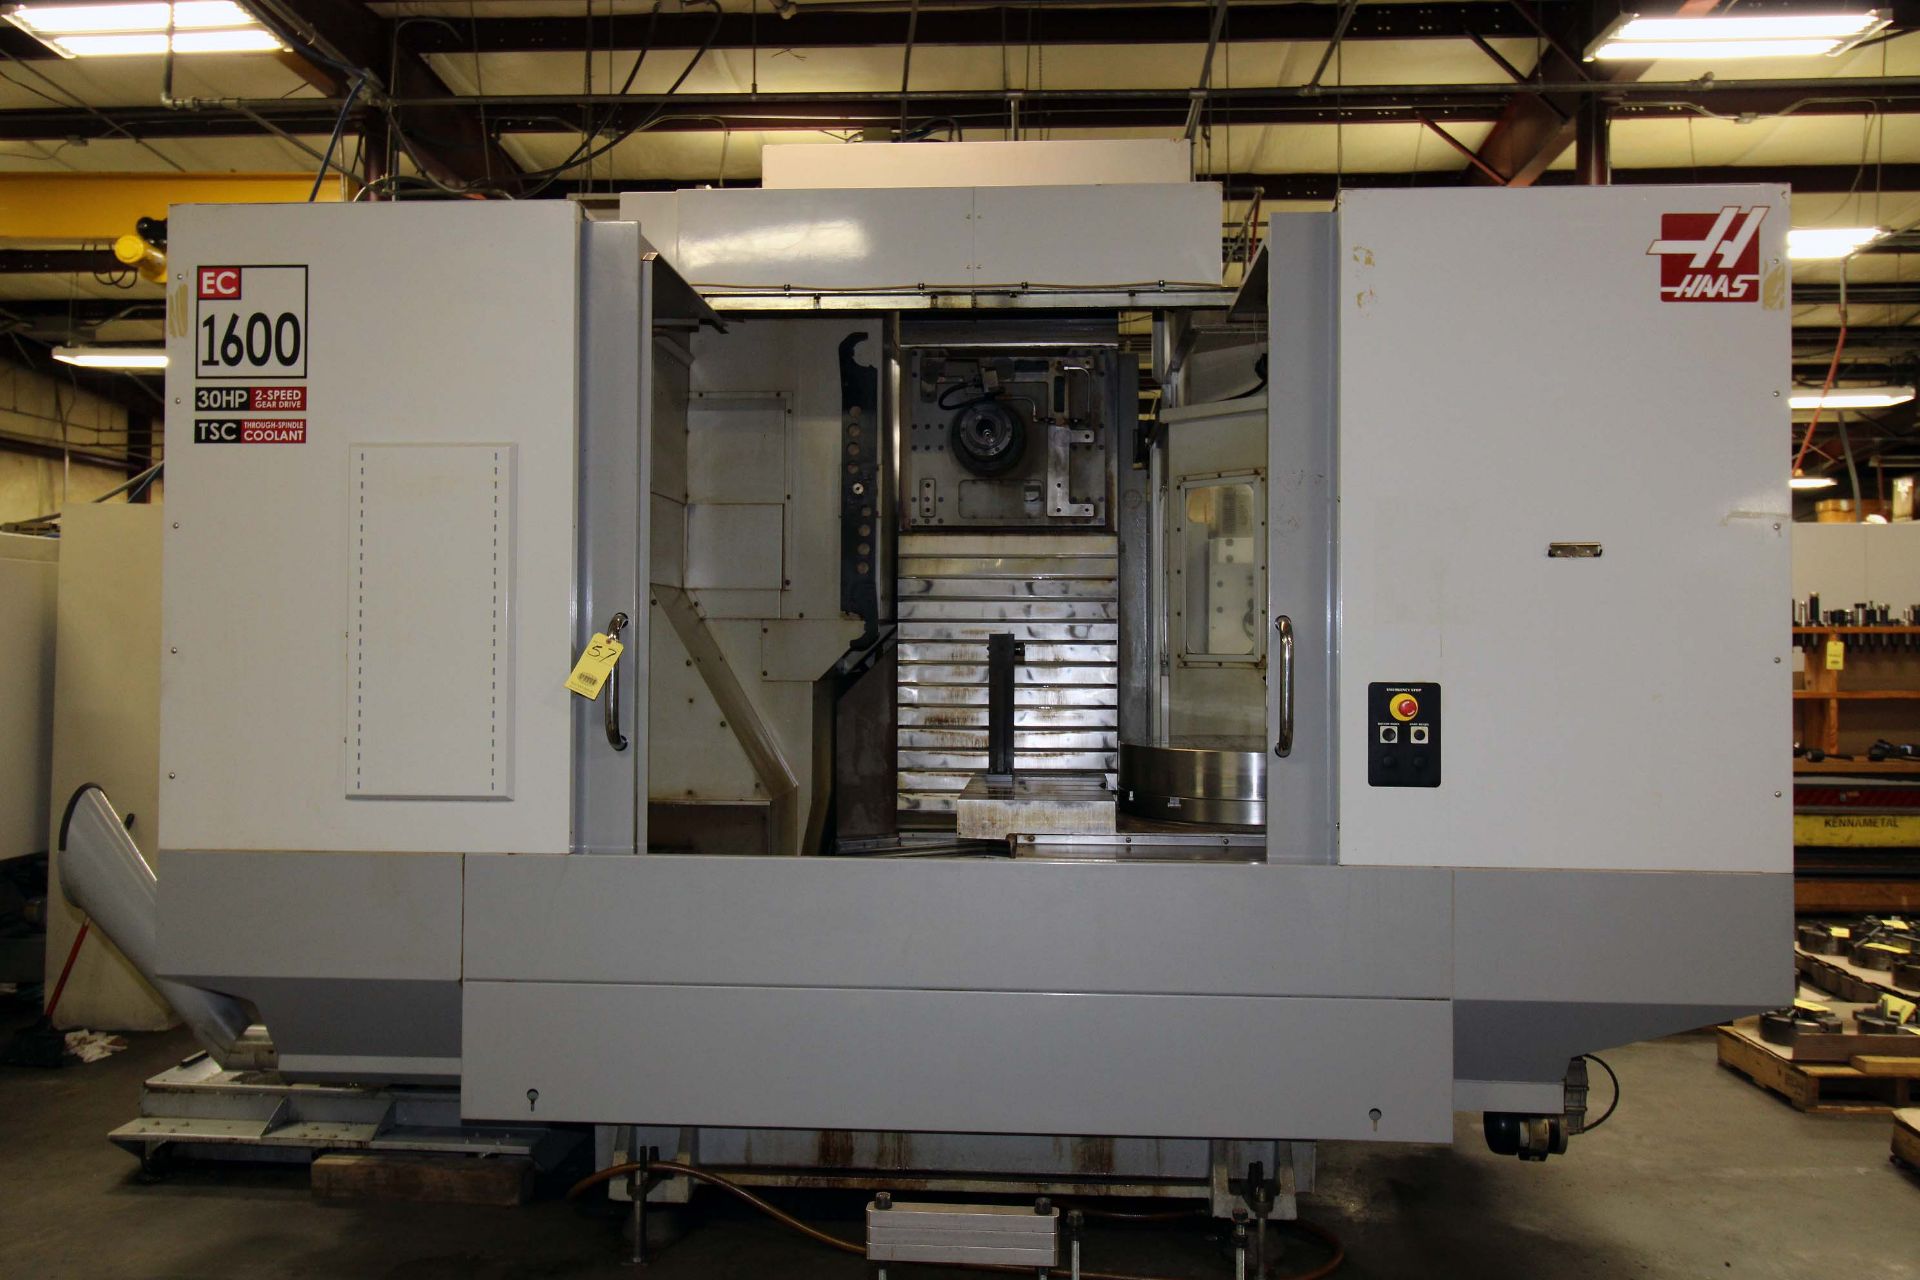 4-AXIS HORIZONTAL MACHINING CENTER, HAAS MDL. EC1600-4X, new 1/2009, 64” x 36” table, 30” built-in